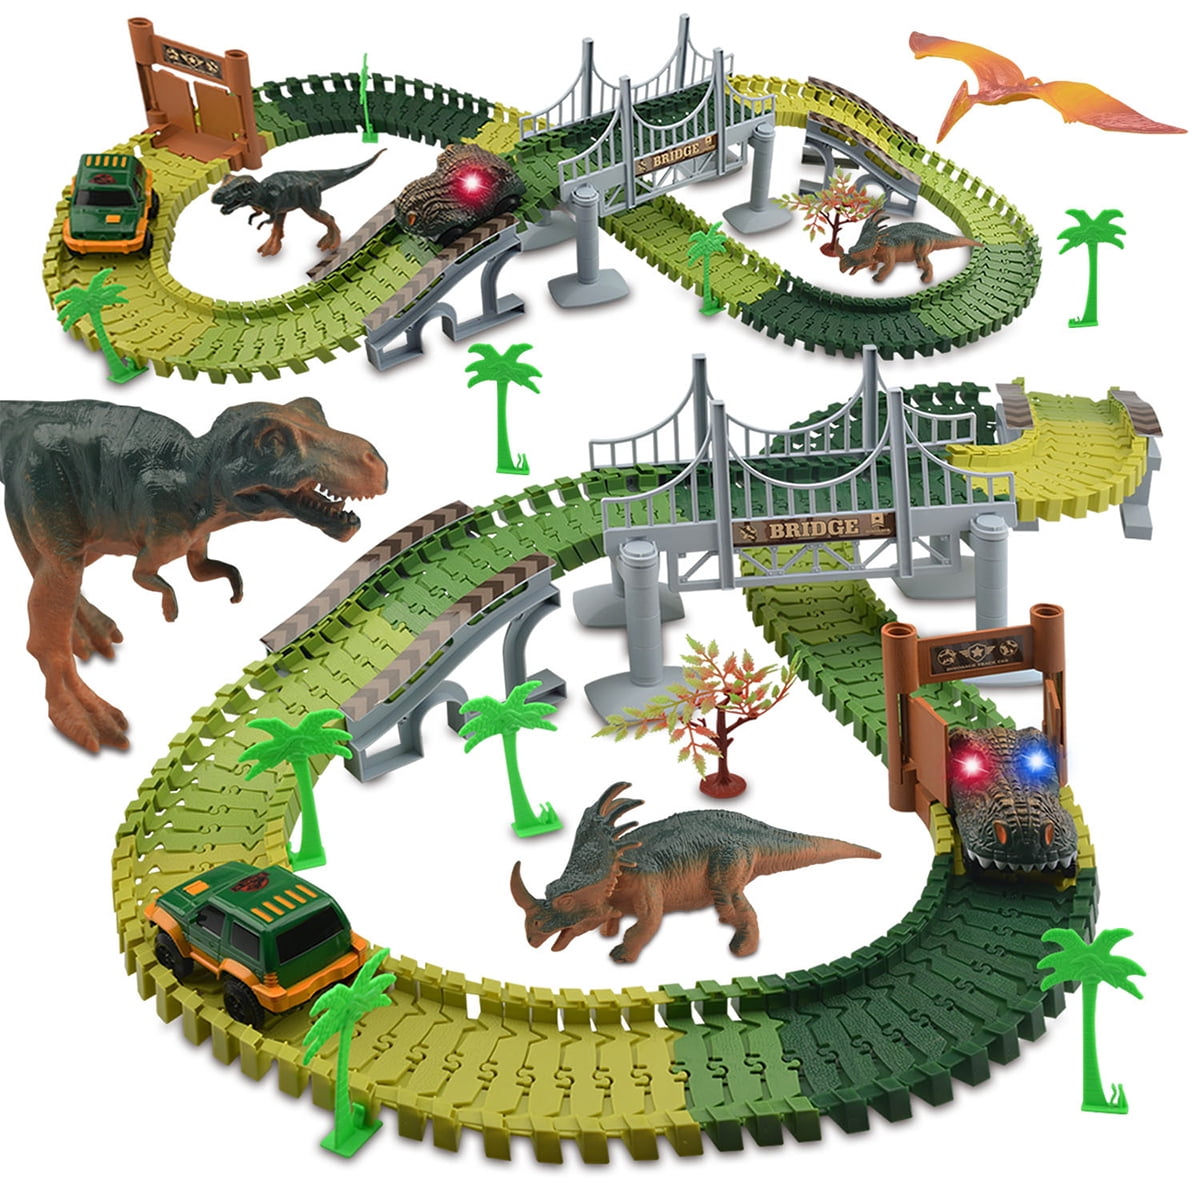 144Pcs Flexible Track Race Car Train Toy Playset Dinosaur Building Game for Kids 